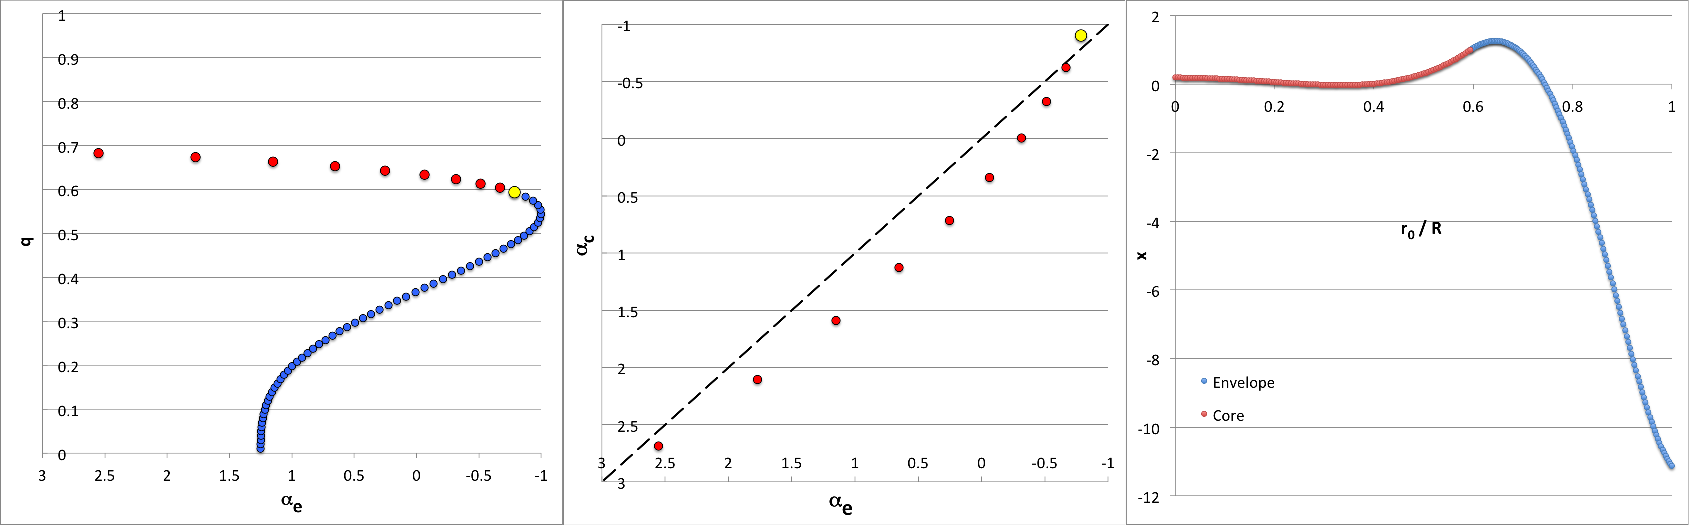 Results for (ell,j) = (3,2)